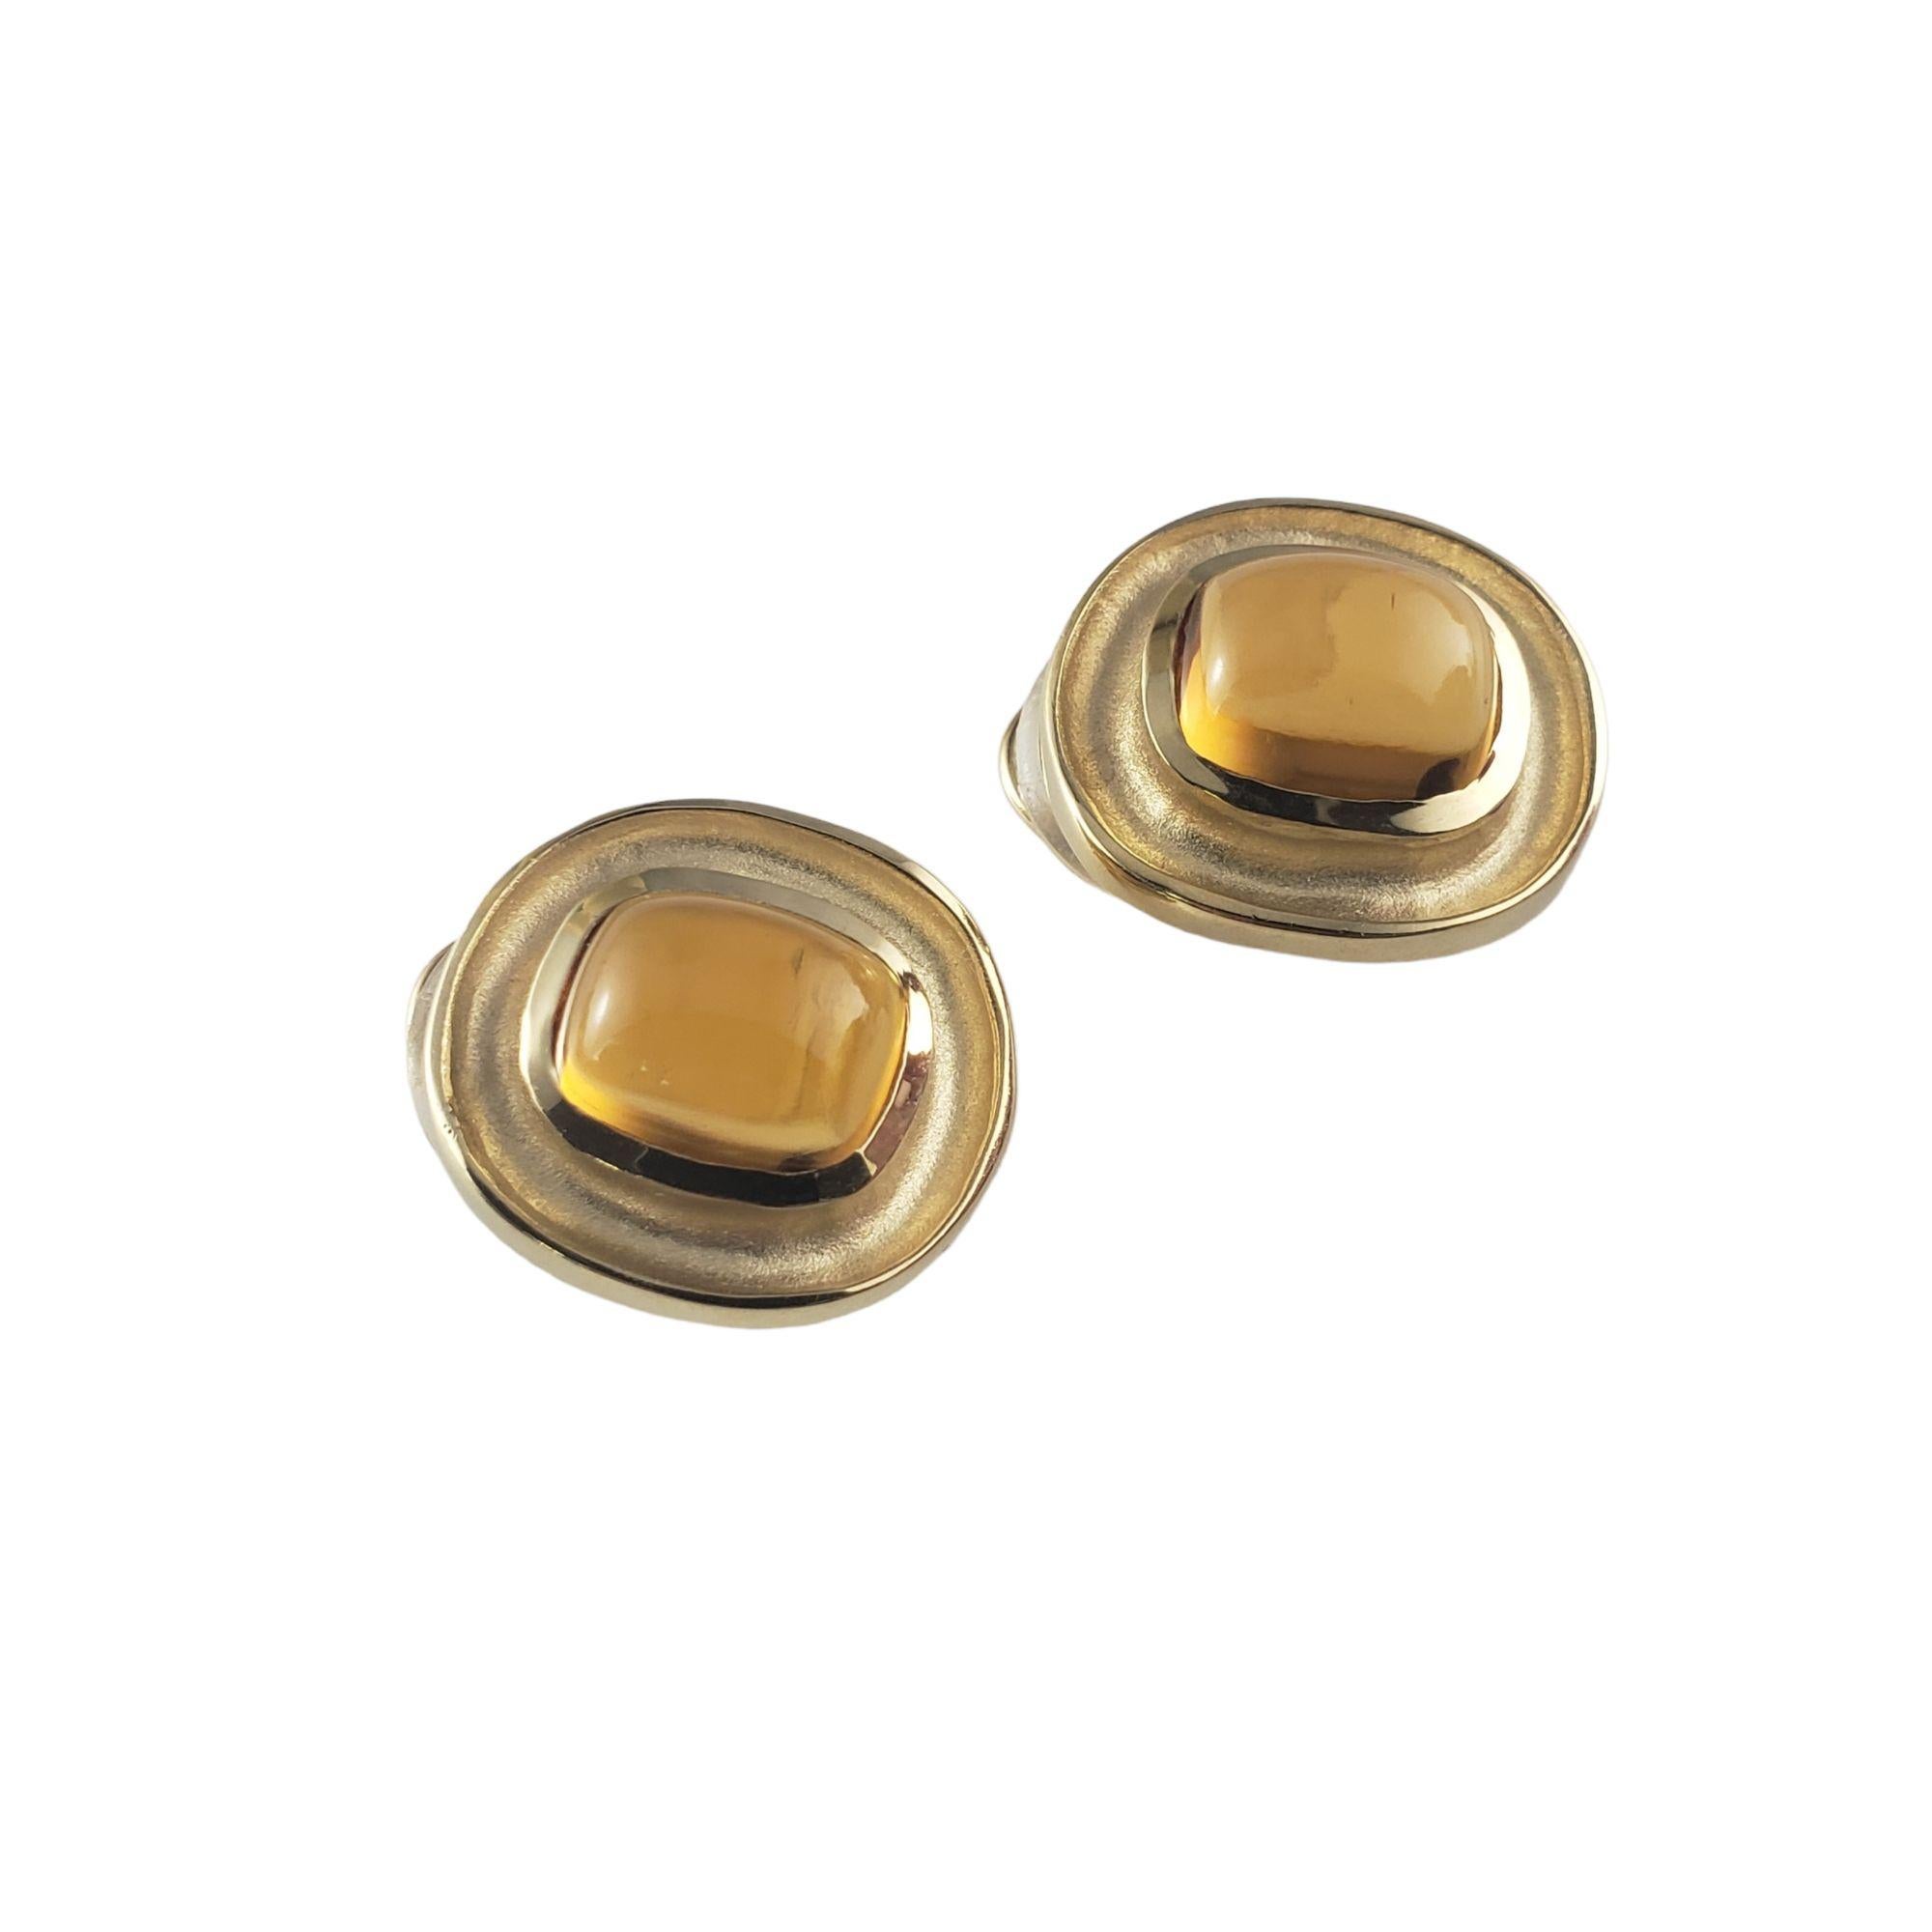 These stunning earrings each feature one cabochon citrine (11 mm x 9 mm) set in beautifully detailed 14K yellow gold.  Omega back closures.

Total citrine weight:  9.04 ct.

Size: 21 mm x 18 mm

Weight:  11.6 gr./  7.4 dwt.

Stamped:  14K

JAGi